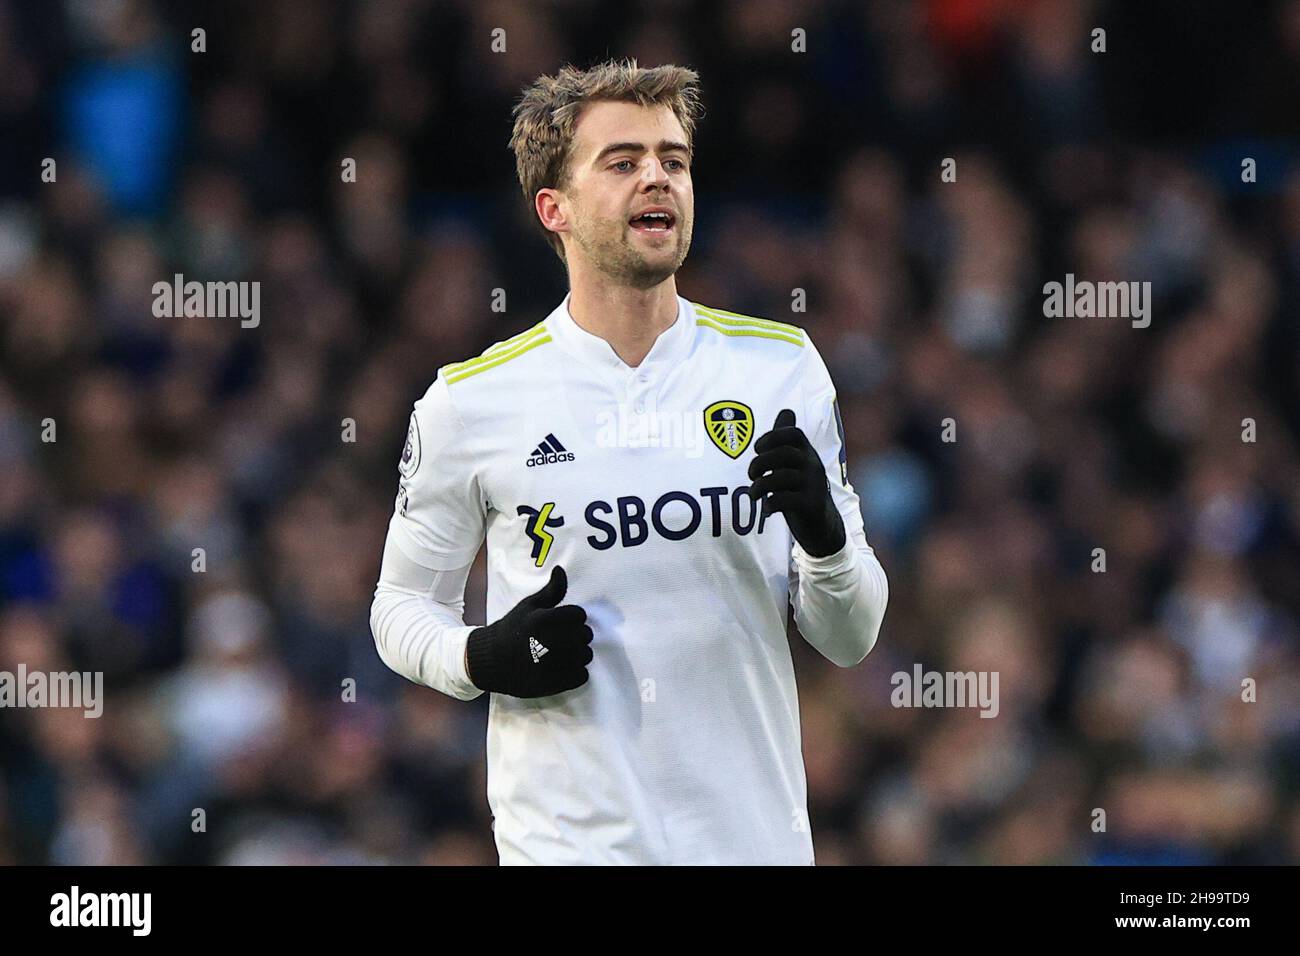 Patrick Bamford #9 of Leeds United during the game Stock Photo